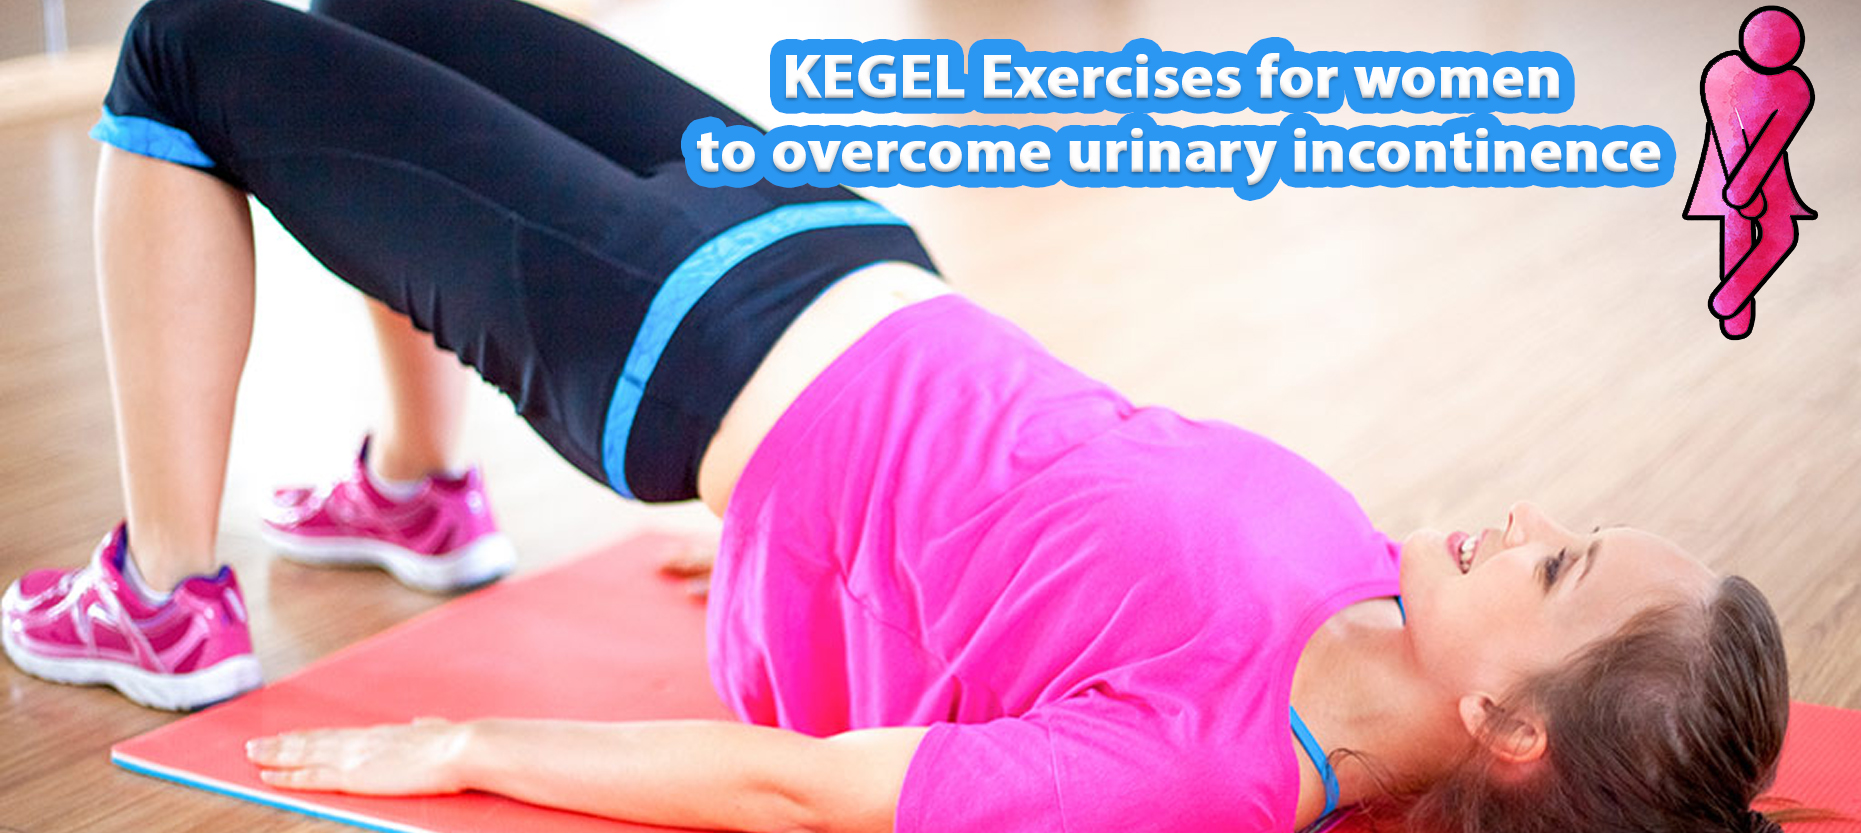 Kegel Exercises for Women to Overcome Urinary Incontinence